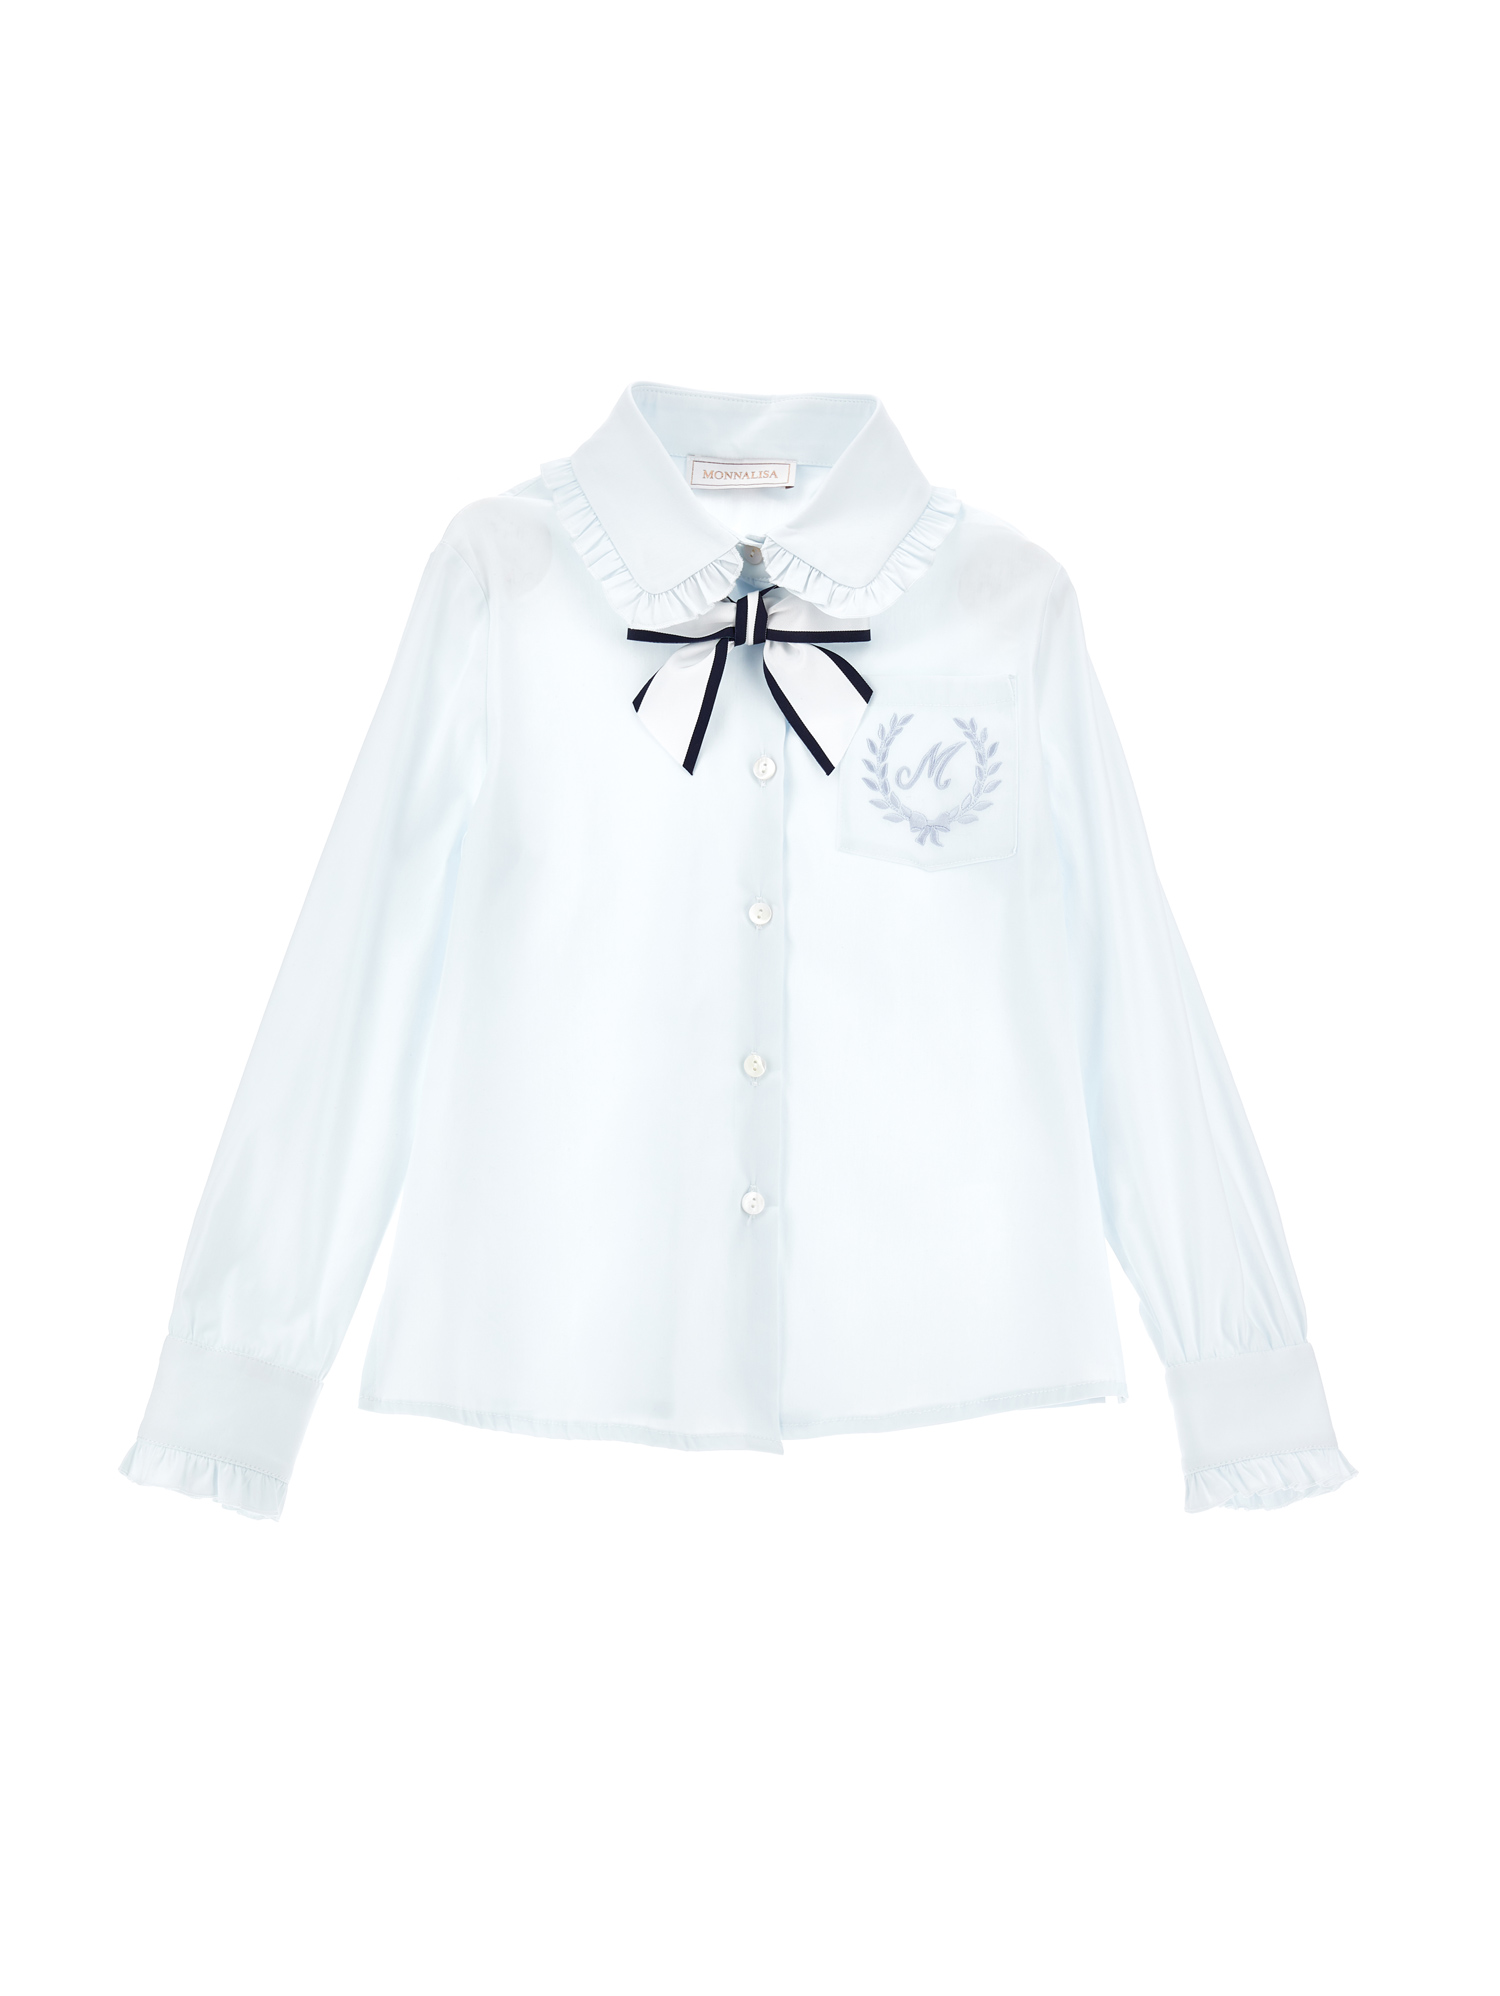 Monnalisa Kids'   Stretch Shirt With Bow In Light Blue + Blue